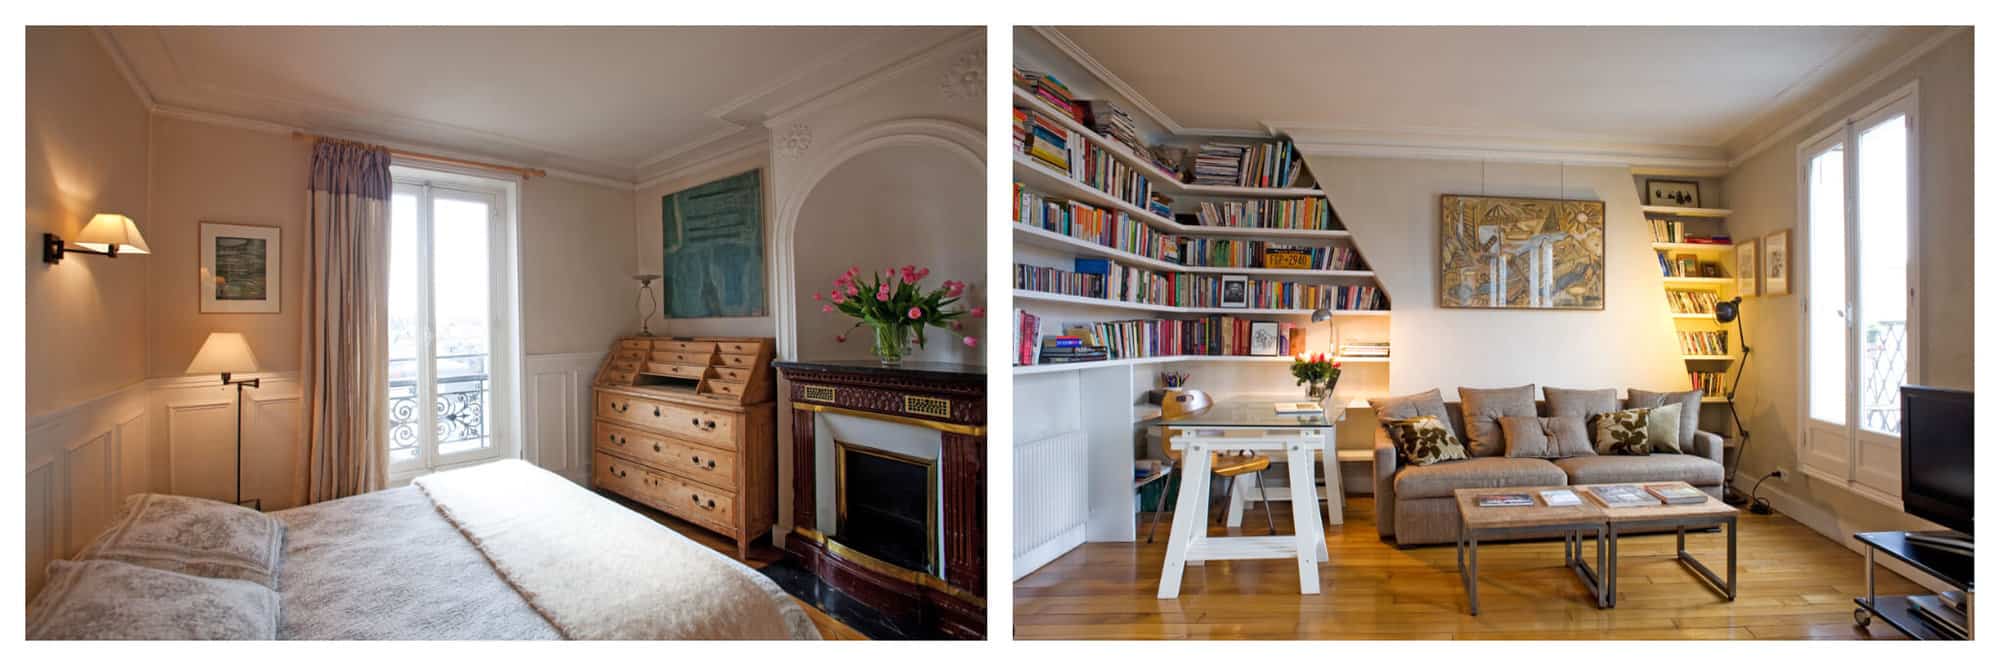 Left: the bedroom of a Parisian apartment with a queen bed, chest of drawers, and fireplace with a vase of flowers sitting on the mantle. Right: the living room of a Parisian apartment with bookshelves covering the walls, art, a desk, sofa, and coffee table. 